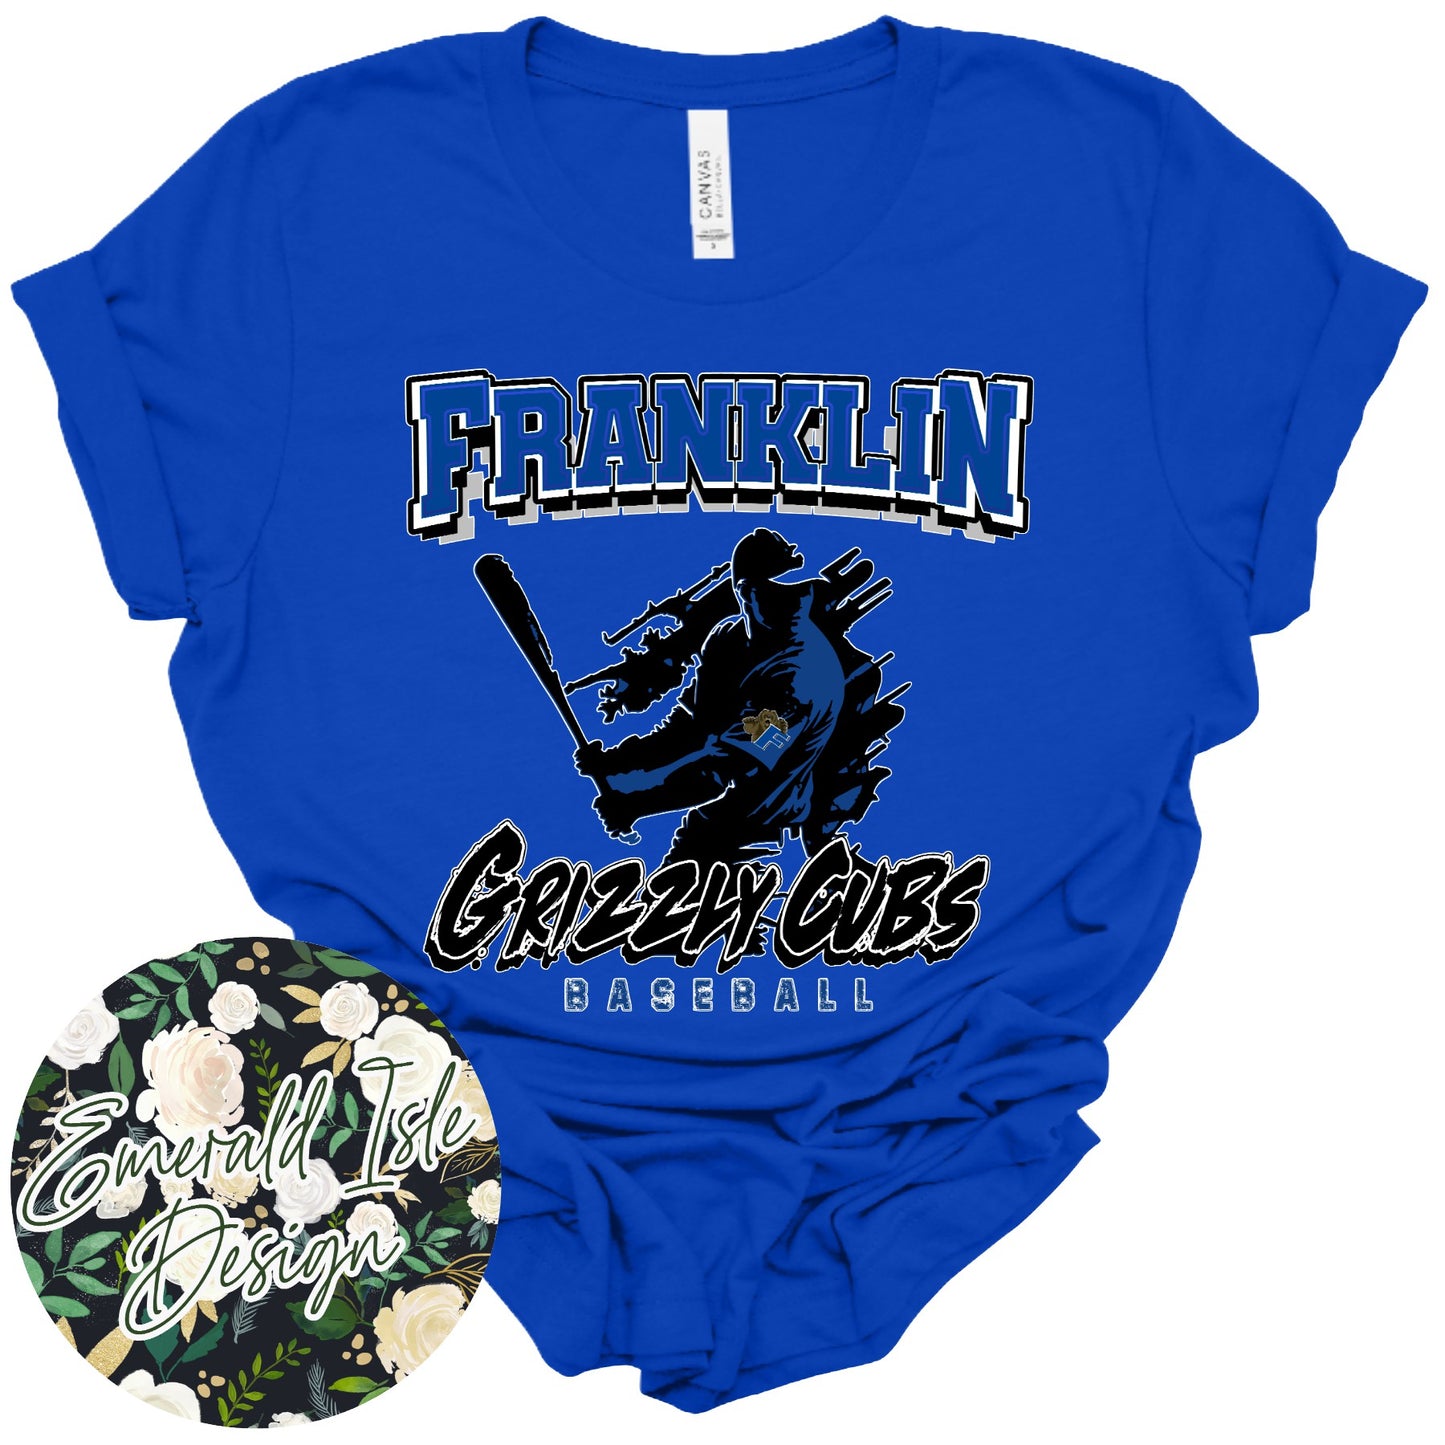 Franklin Grizzly Cubs Baseball Design